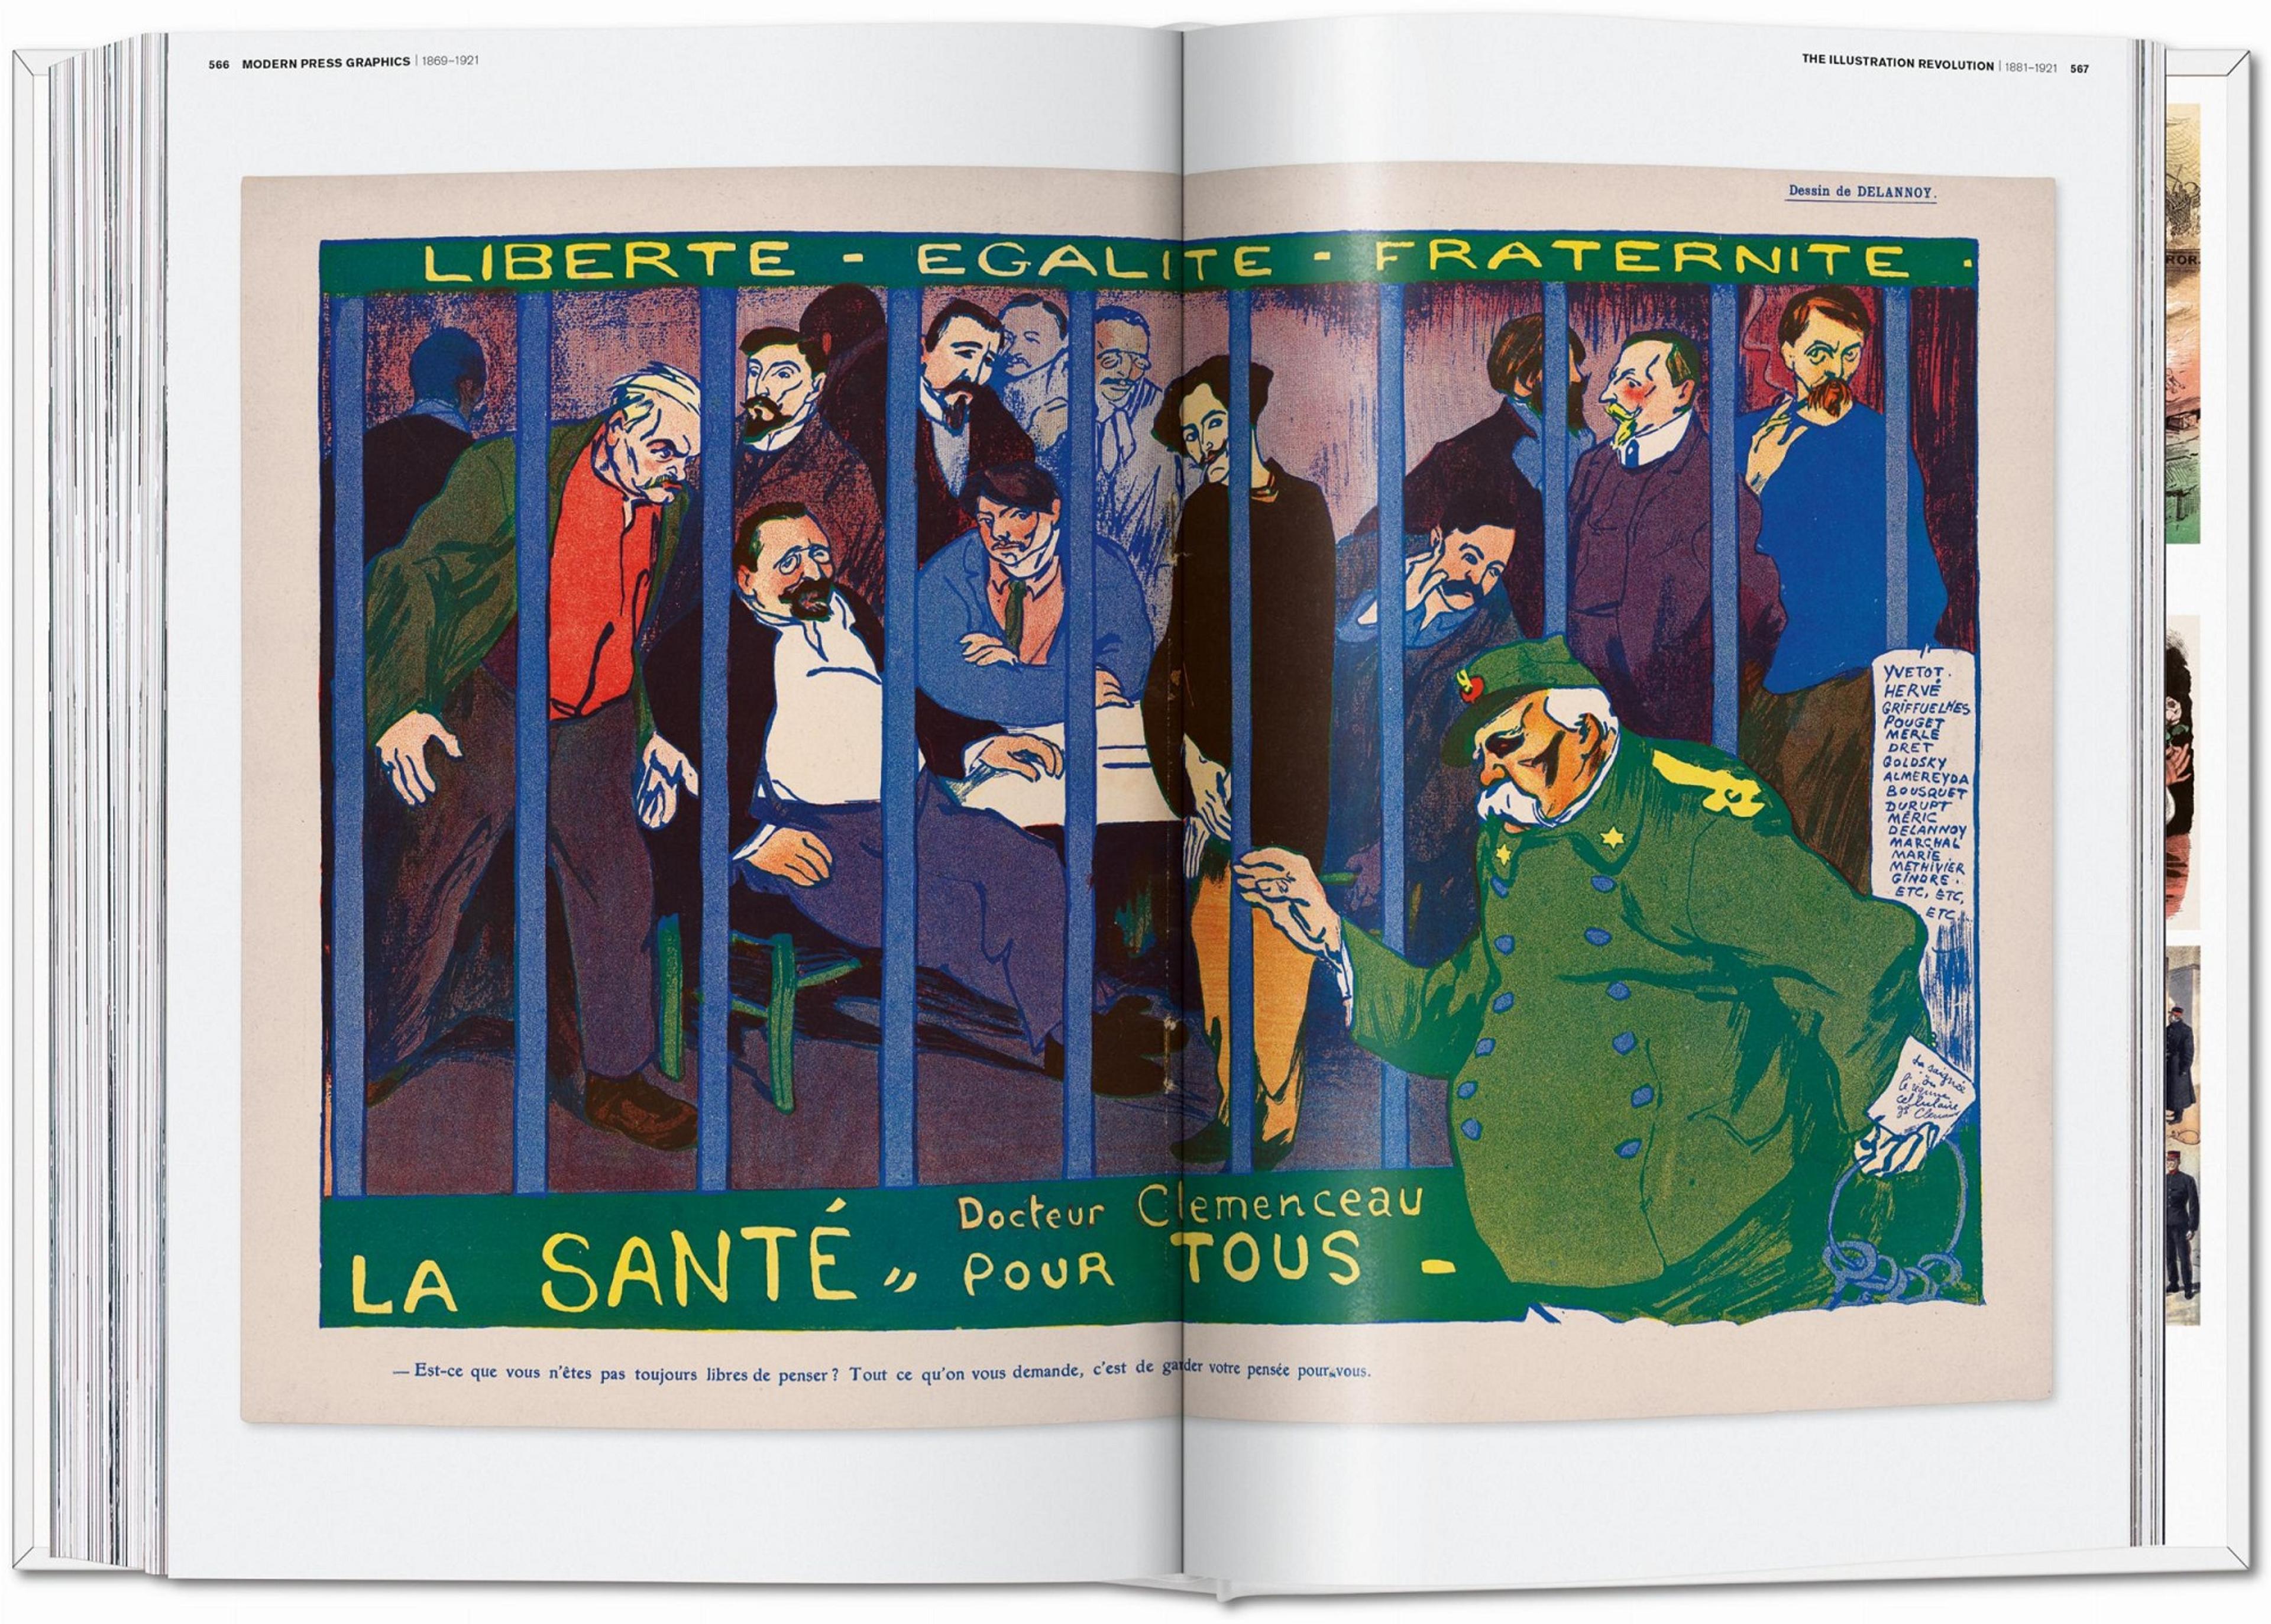 Photograph of an open book with an illustration of imprisoned people